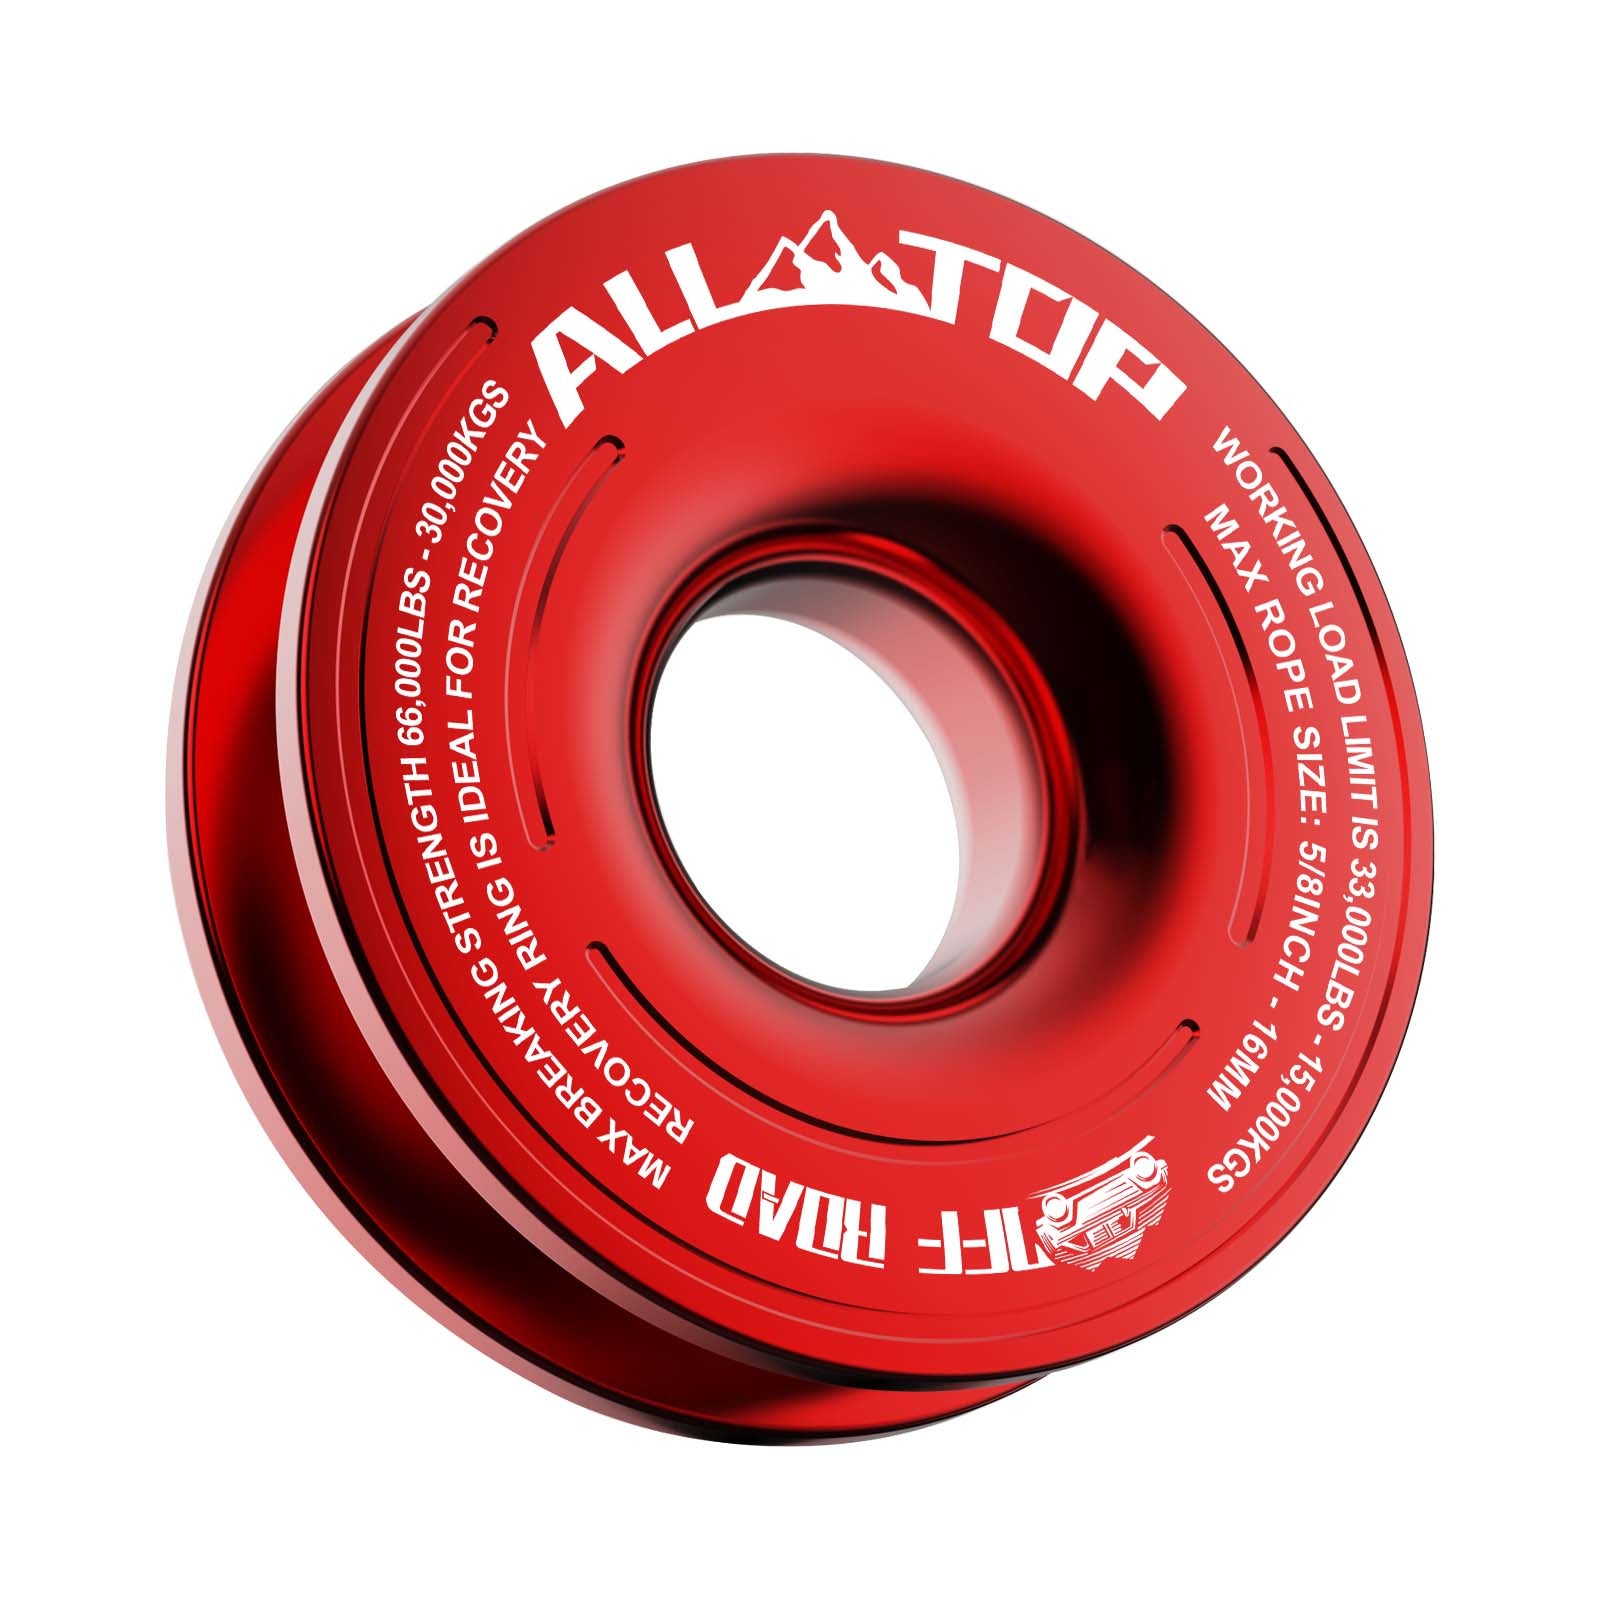 ALL-TOP Recovery Ring - 66,000 Lbs - Red